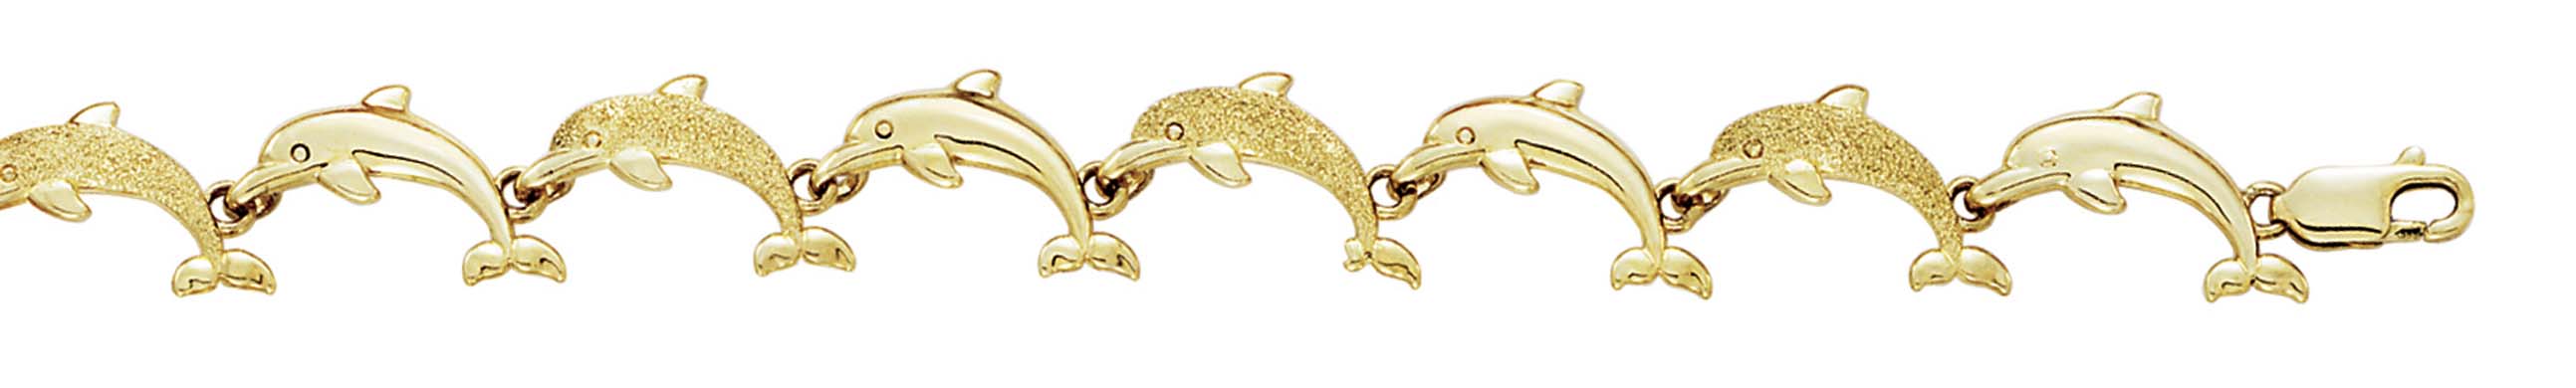 
14k Yellow Gold Small Laser Dolphins Bracelet - 7.25 Inch
